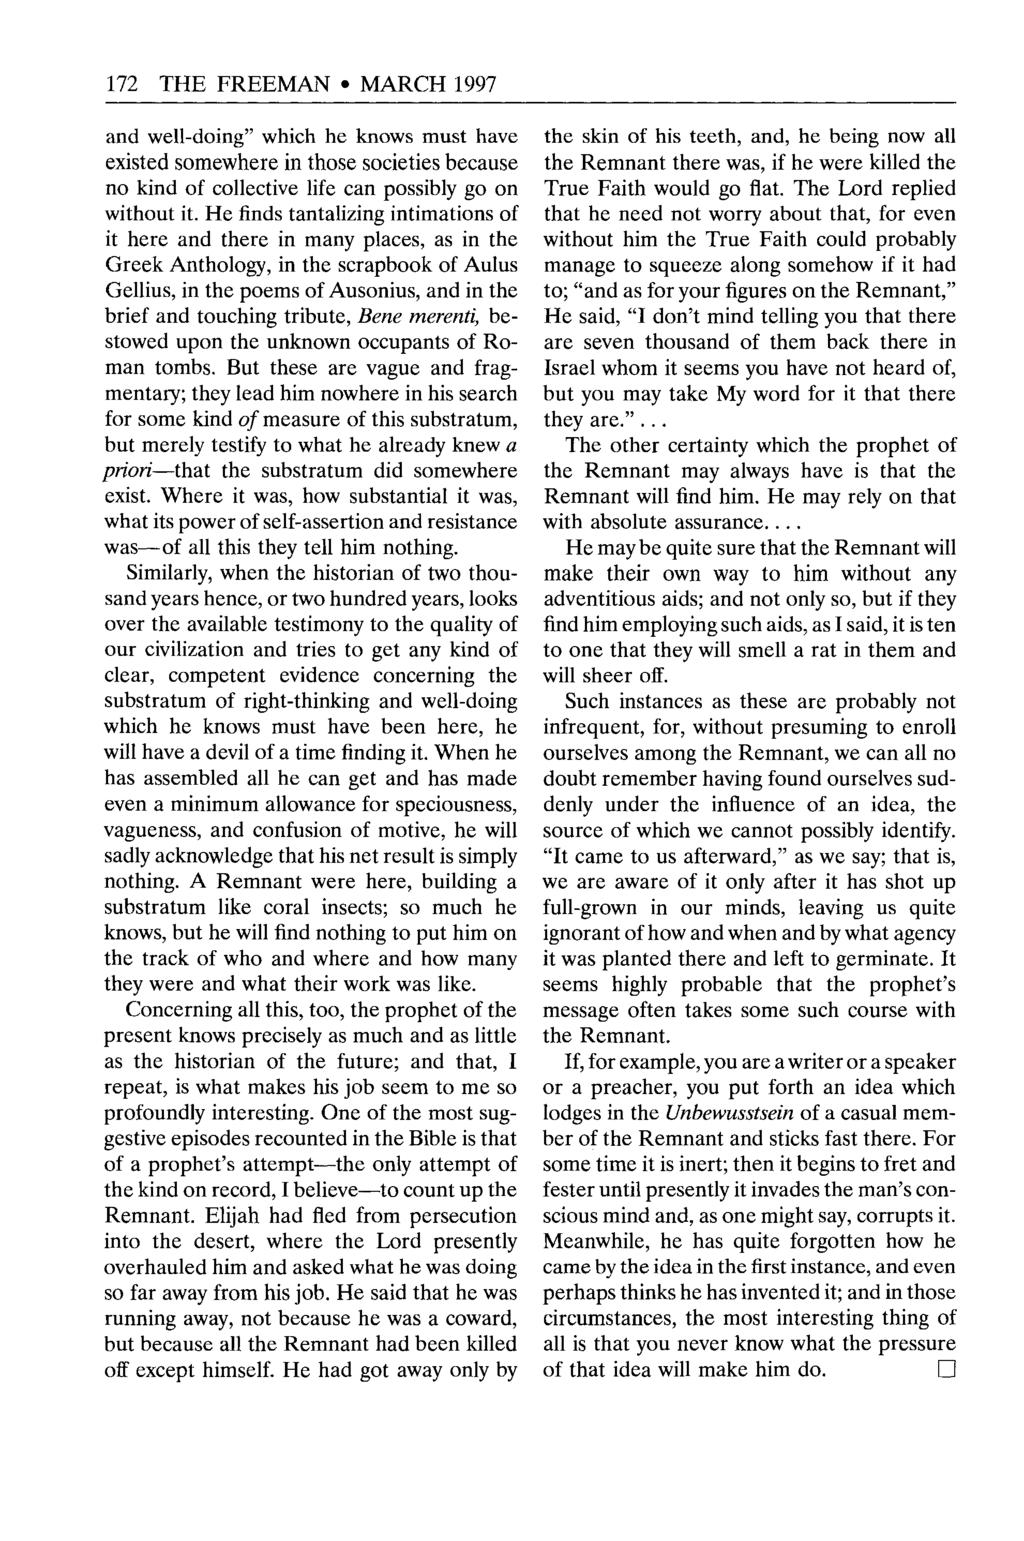 172 THE FREEMAN MARCH 1997 and well-doing" which he knows must have existed somewhere in those societies because no kind of collective life can possibly go on without it.